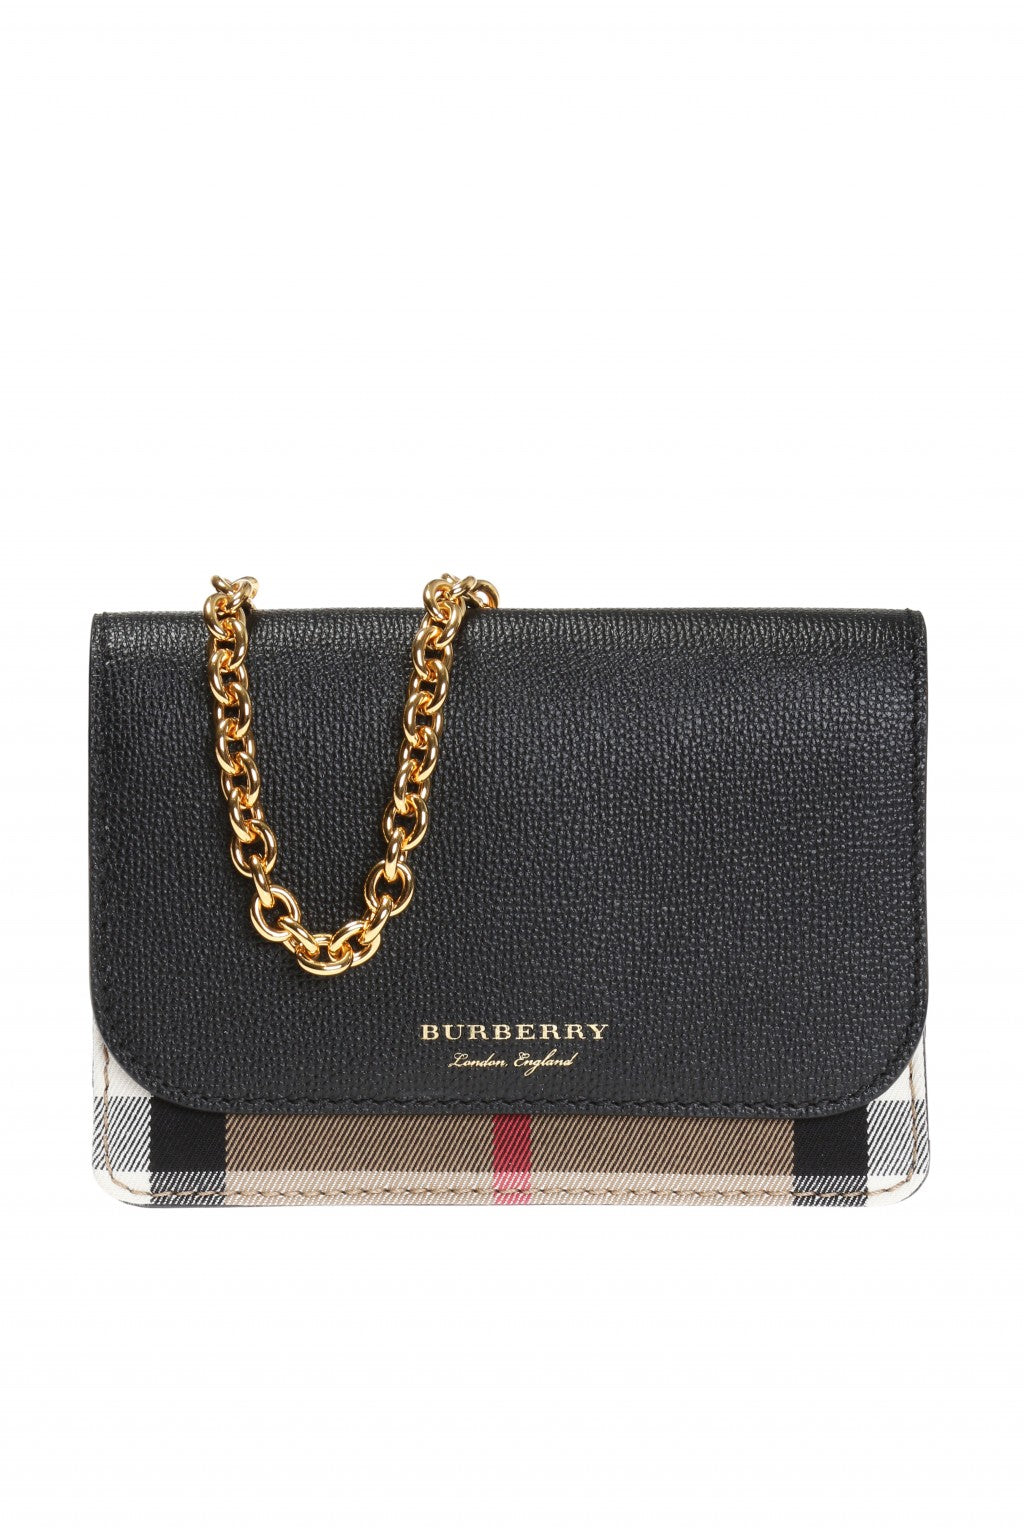 BURBERRY GRAINED CALFSKIN HOUSE CHECK HAMPSHIRE WALLET ON CHAIN –  Caroline's Fashion Luxuries